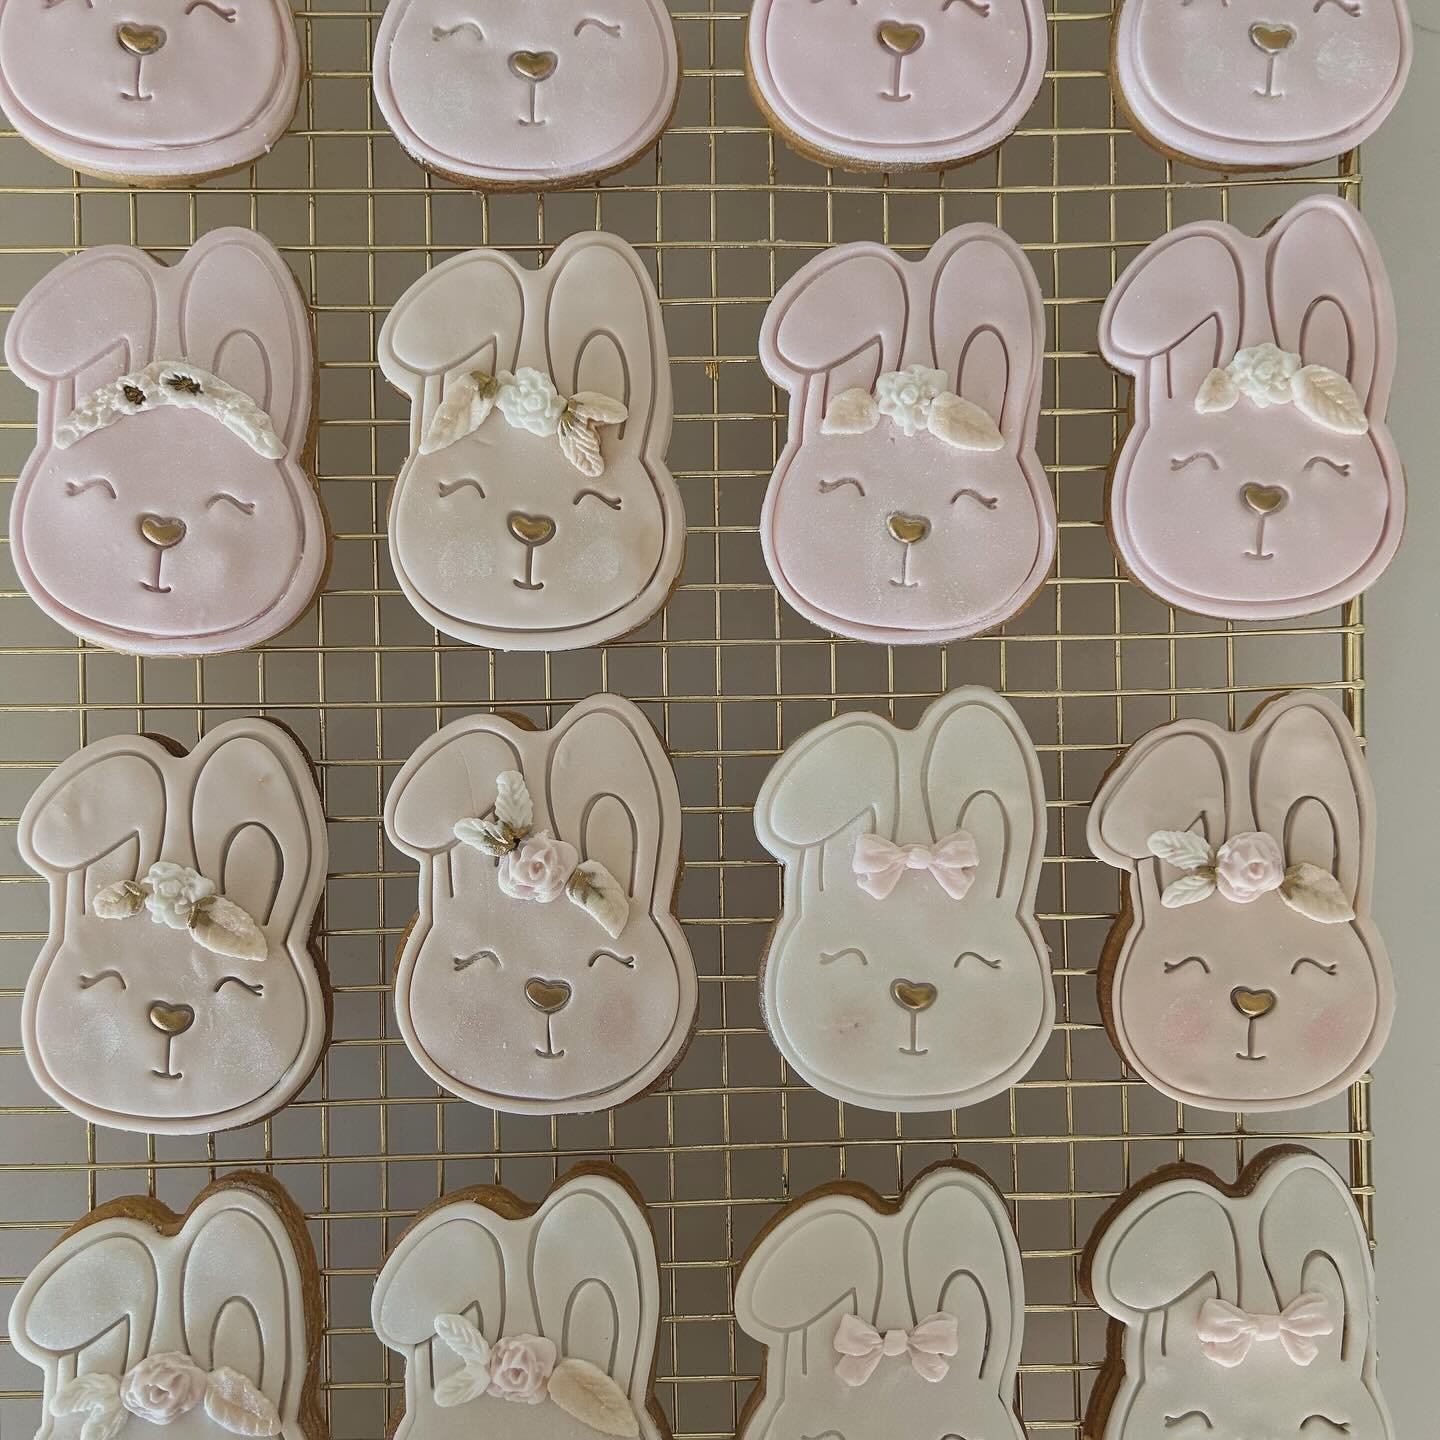 Soft muted tones for a 1st Birthday! 🐰 🐰 🐰 #bunny #perthcookies #sugarcookiesperth #sugarcookies #cookies #bunnycookies #corporatecookies